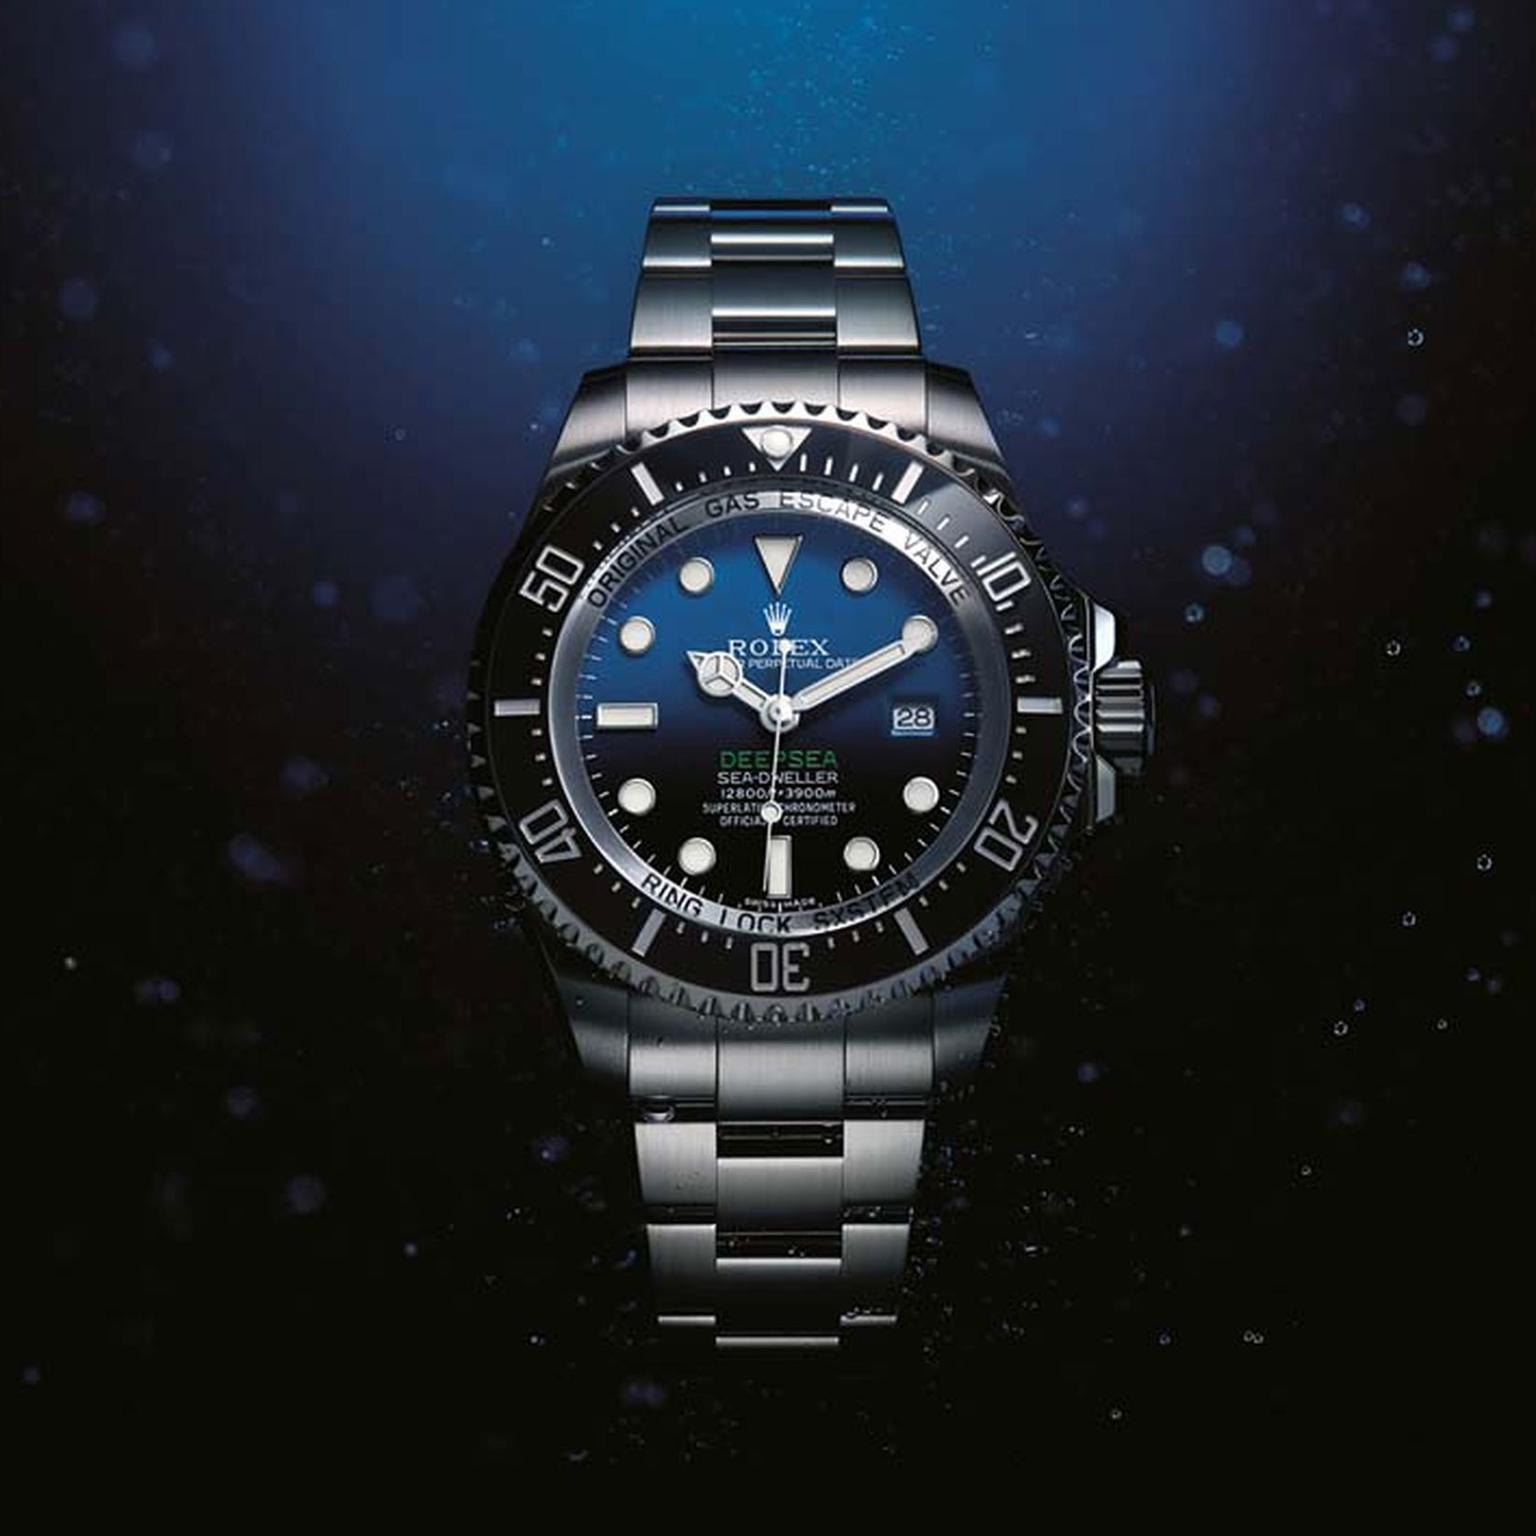 Rolex watches: a delve into the history 